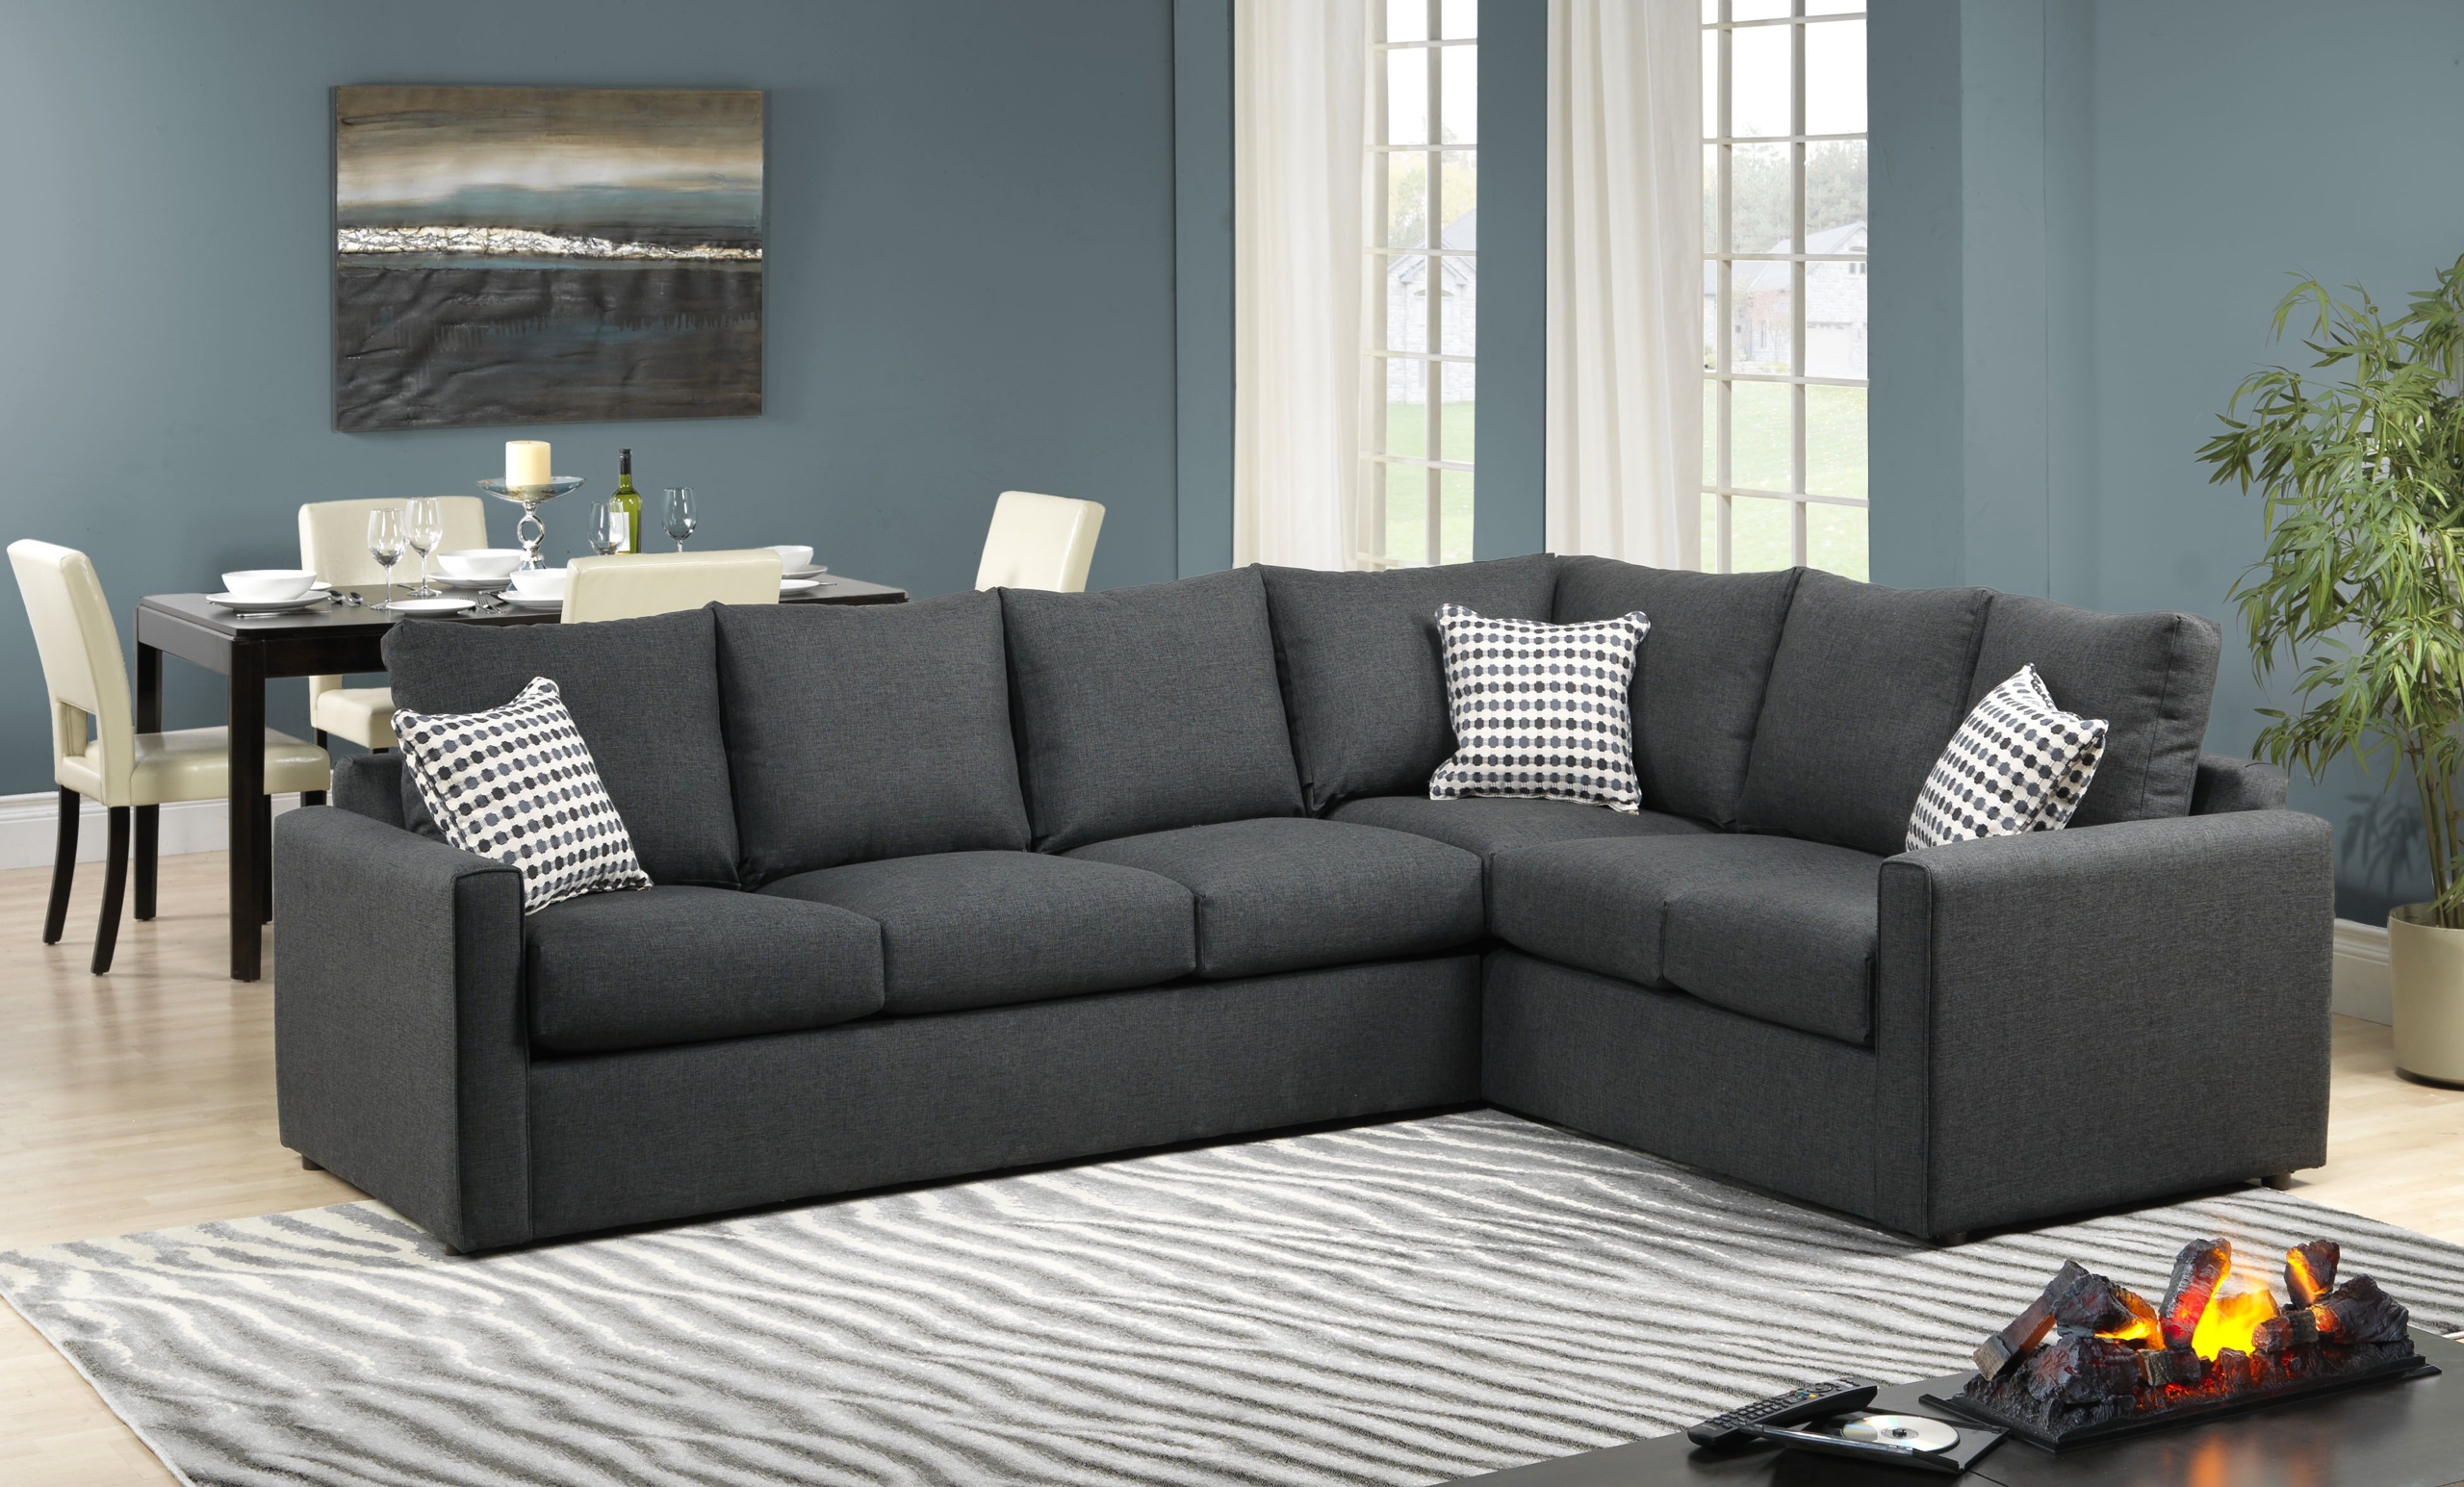 Sectional Couch With Pull Out Bed Visualhunt